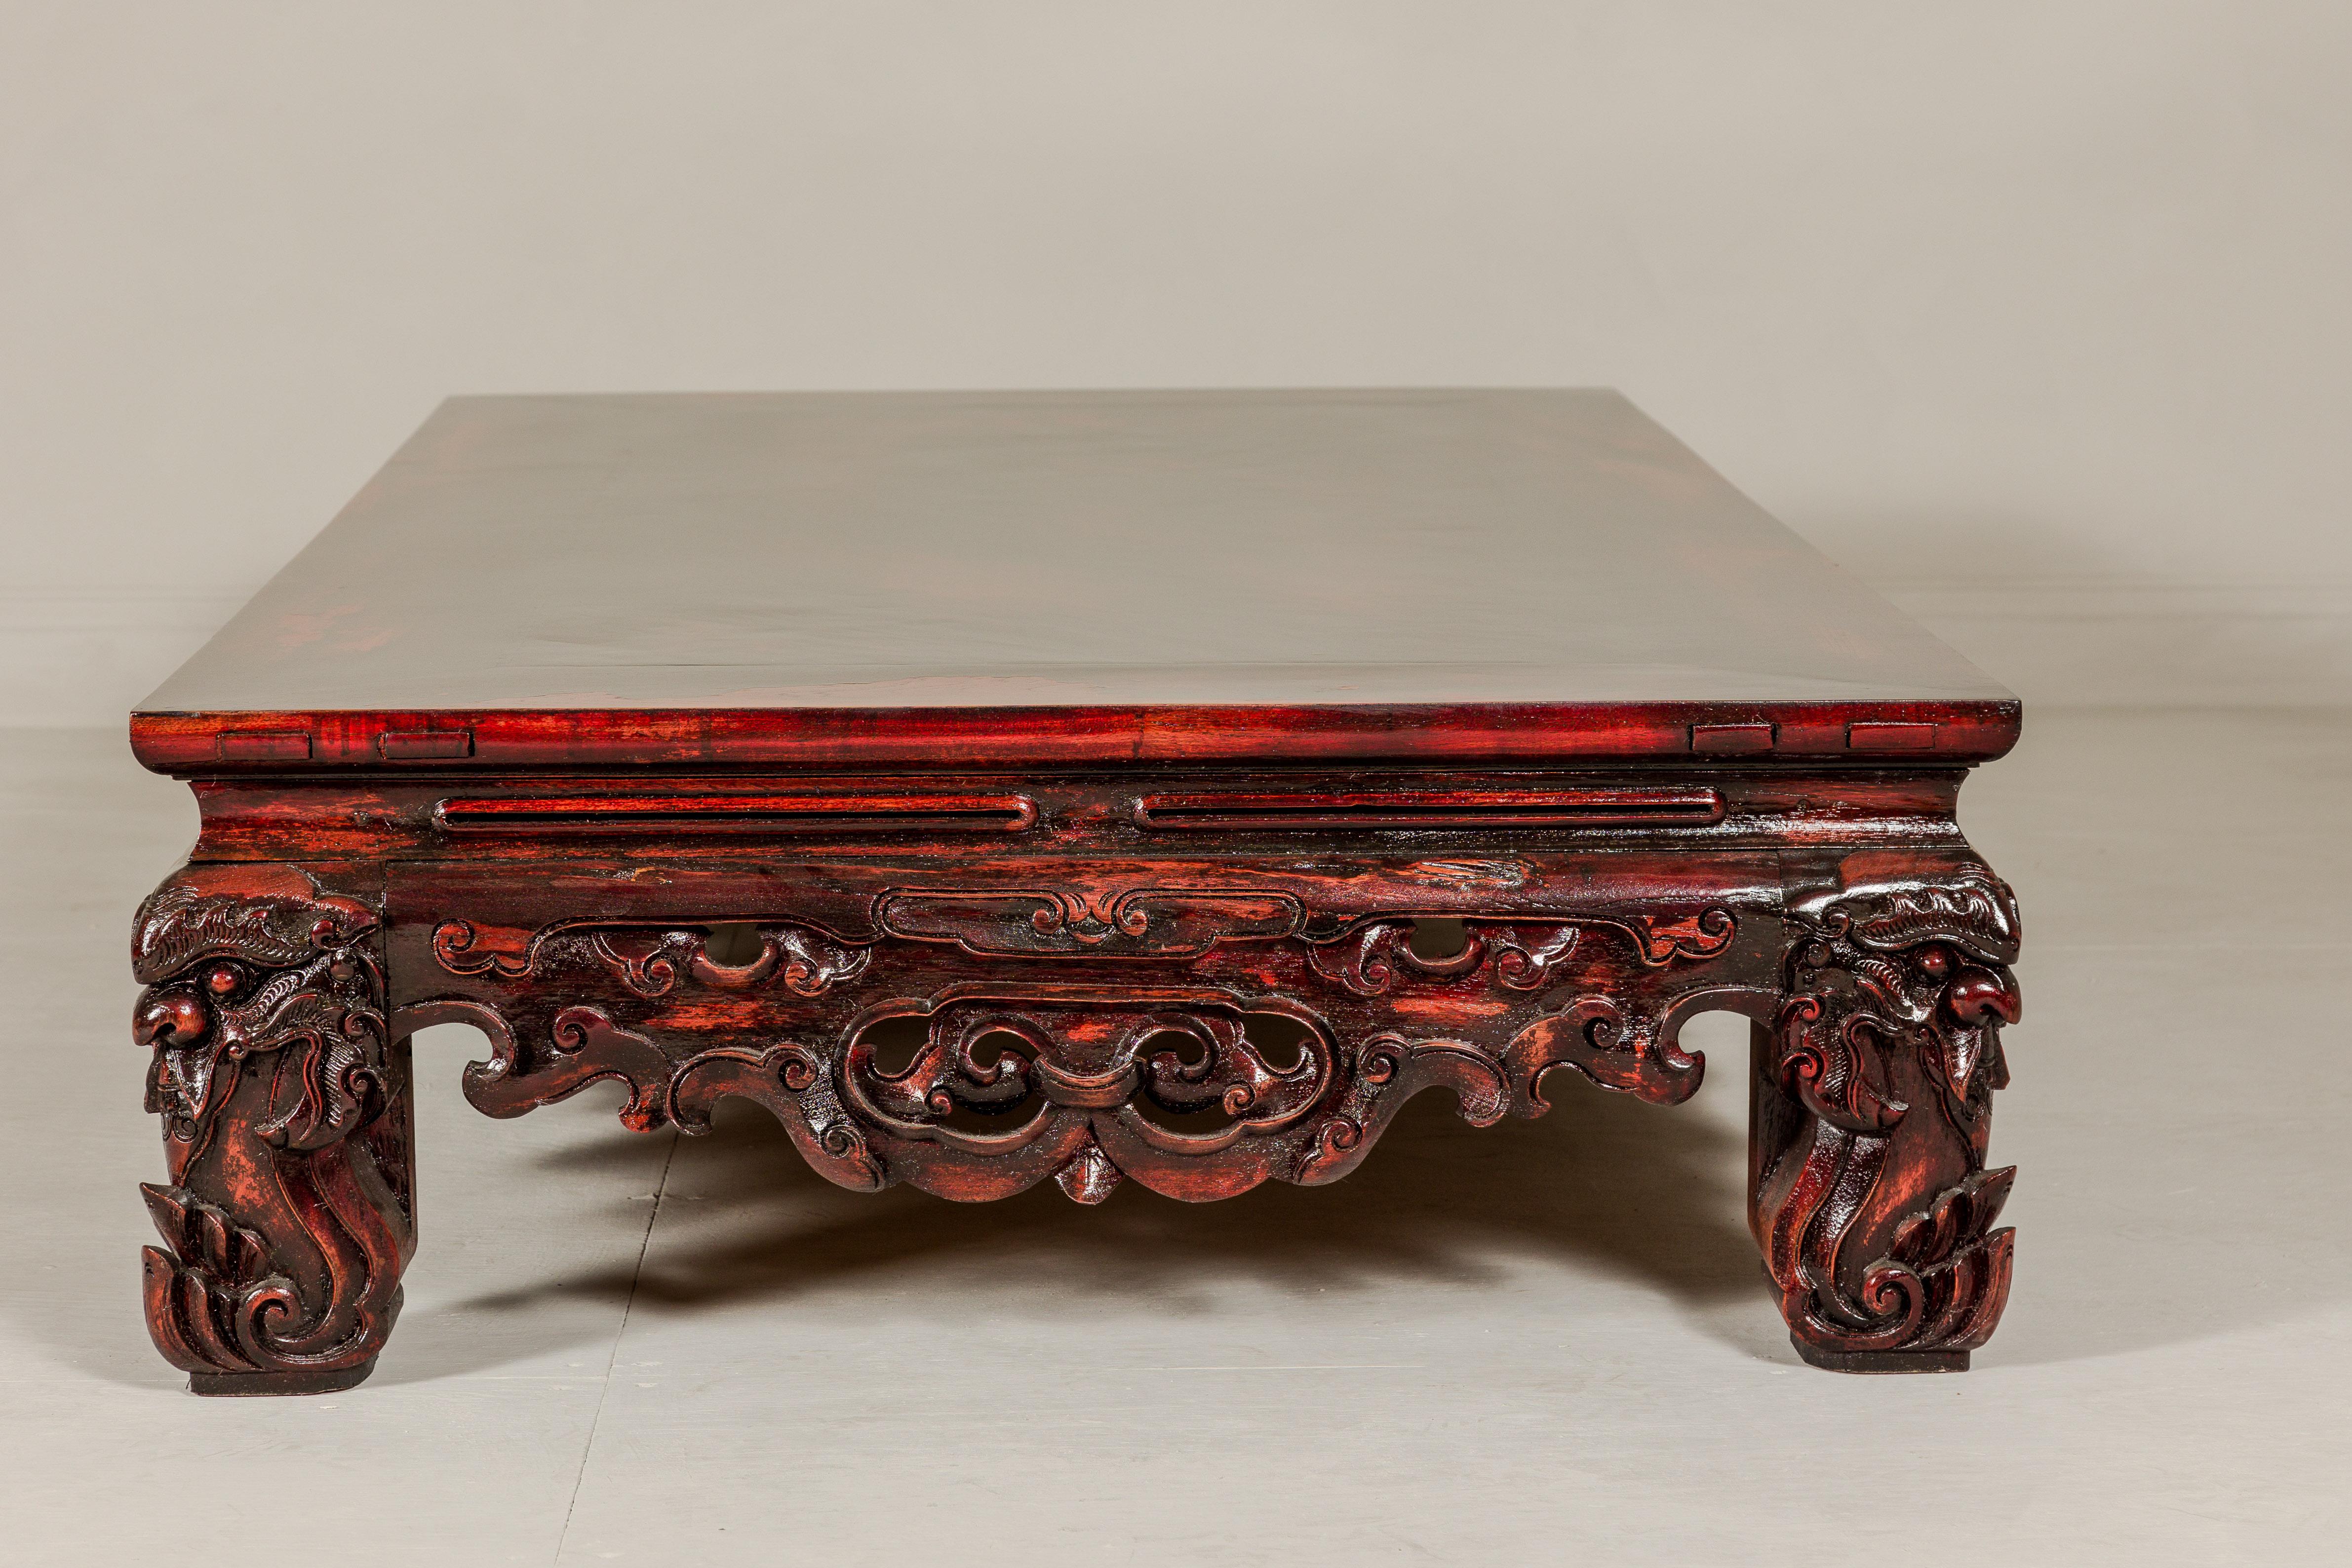 Qing Dynasty Low Kang Coffee Table with Reddish Brown Finish and Carved Décor For Sale 10